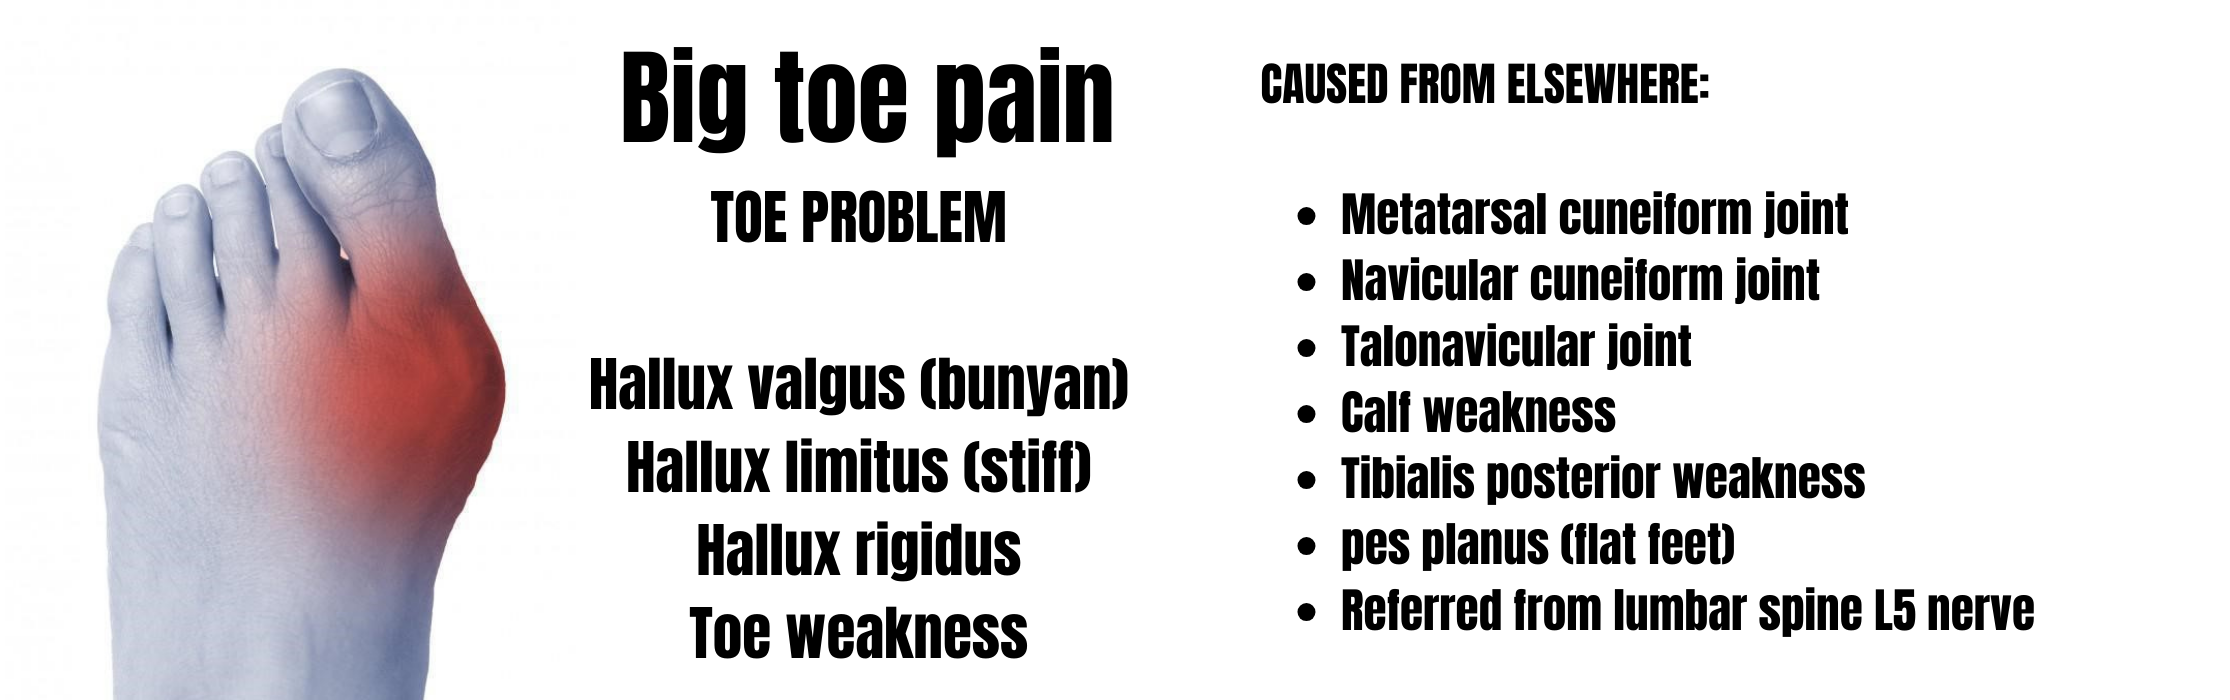 Big toe pain possible causes